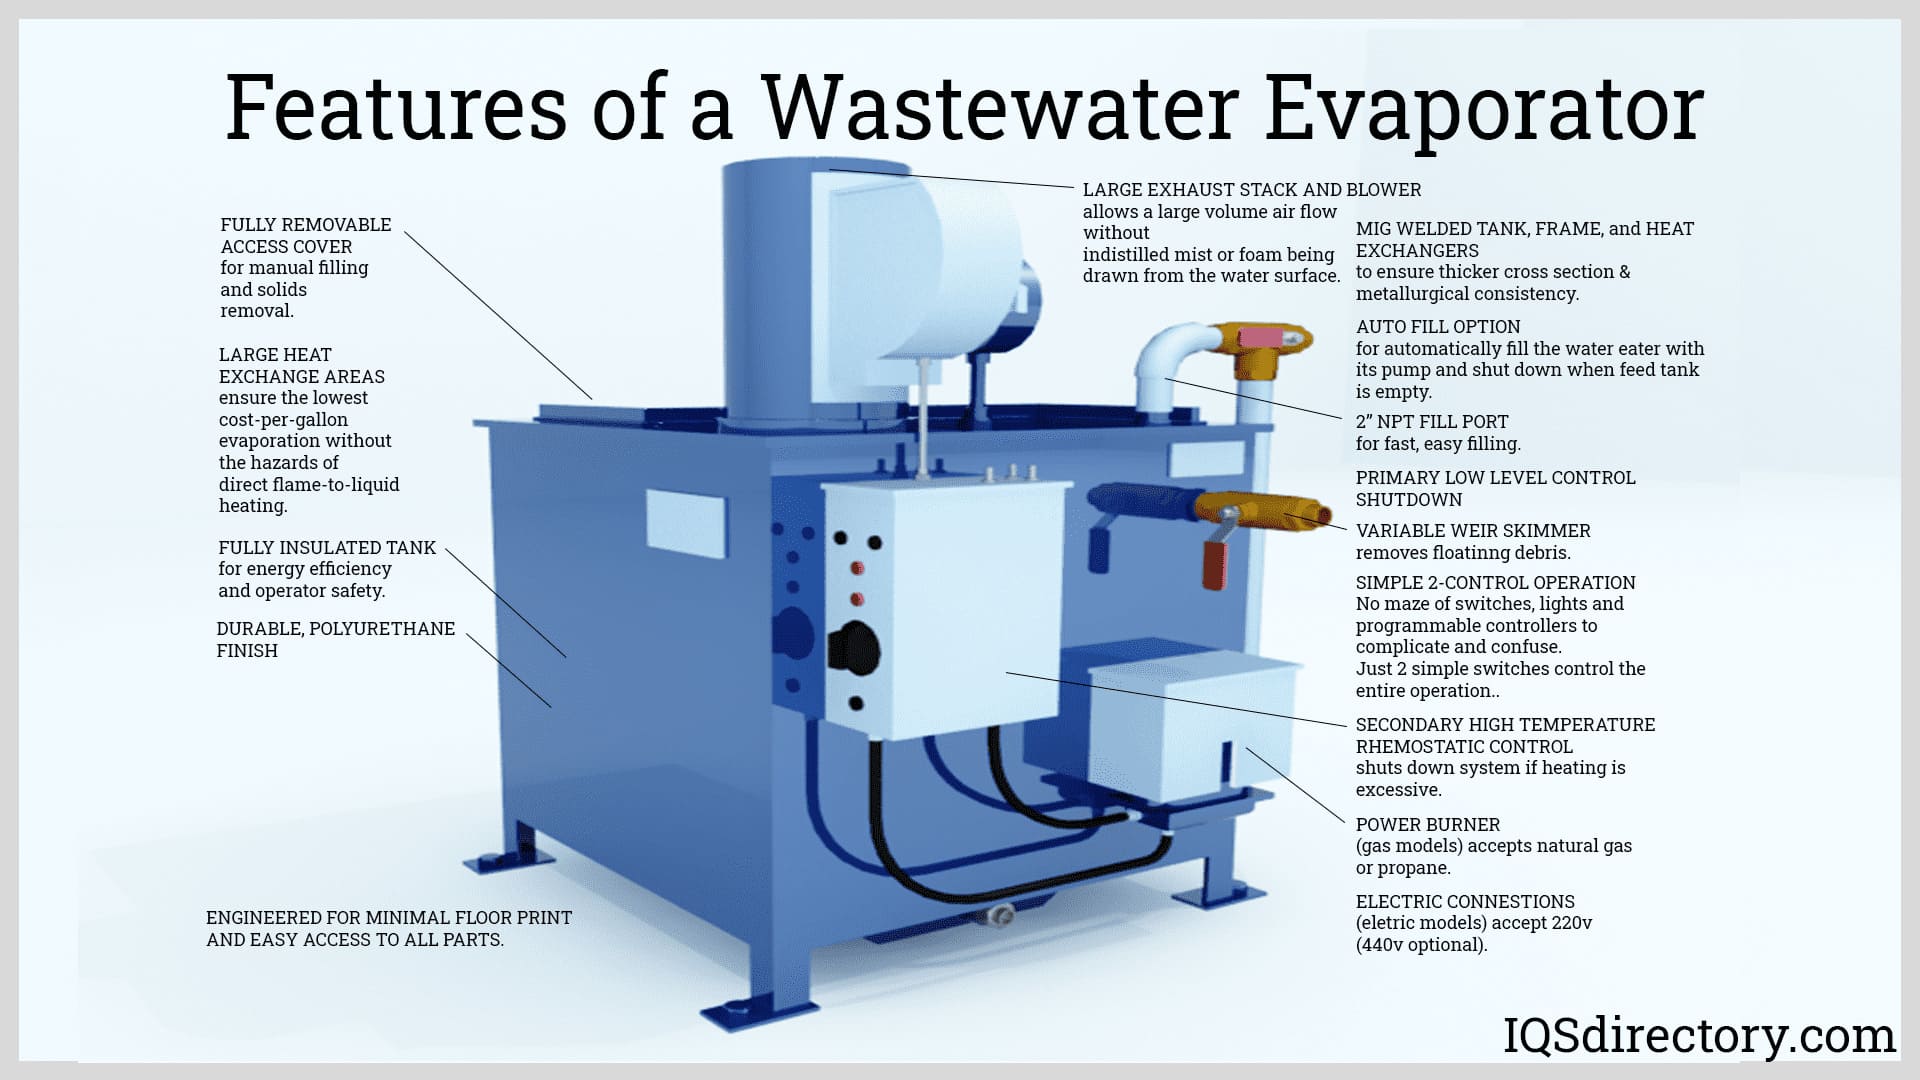 Features of a Wastewater Evaporator